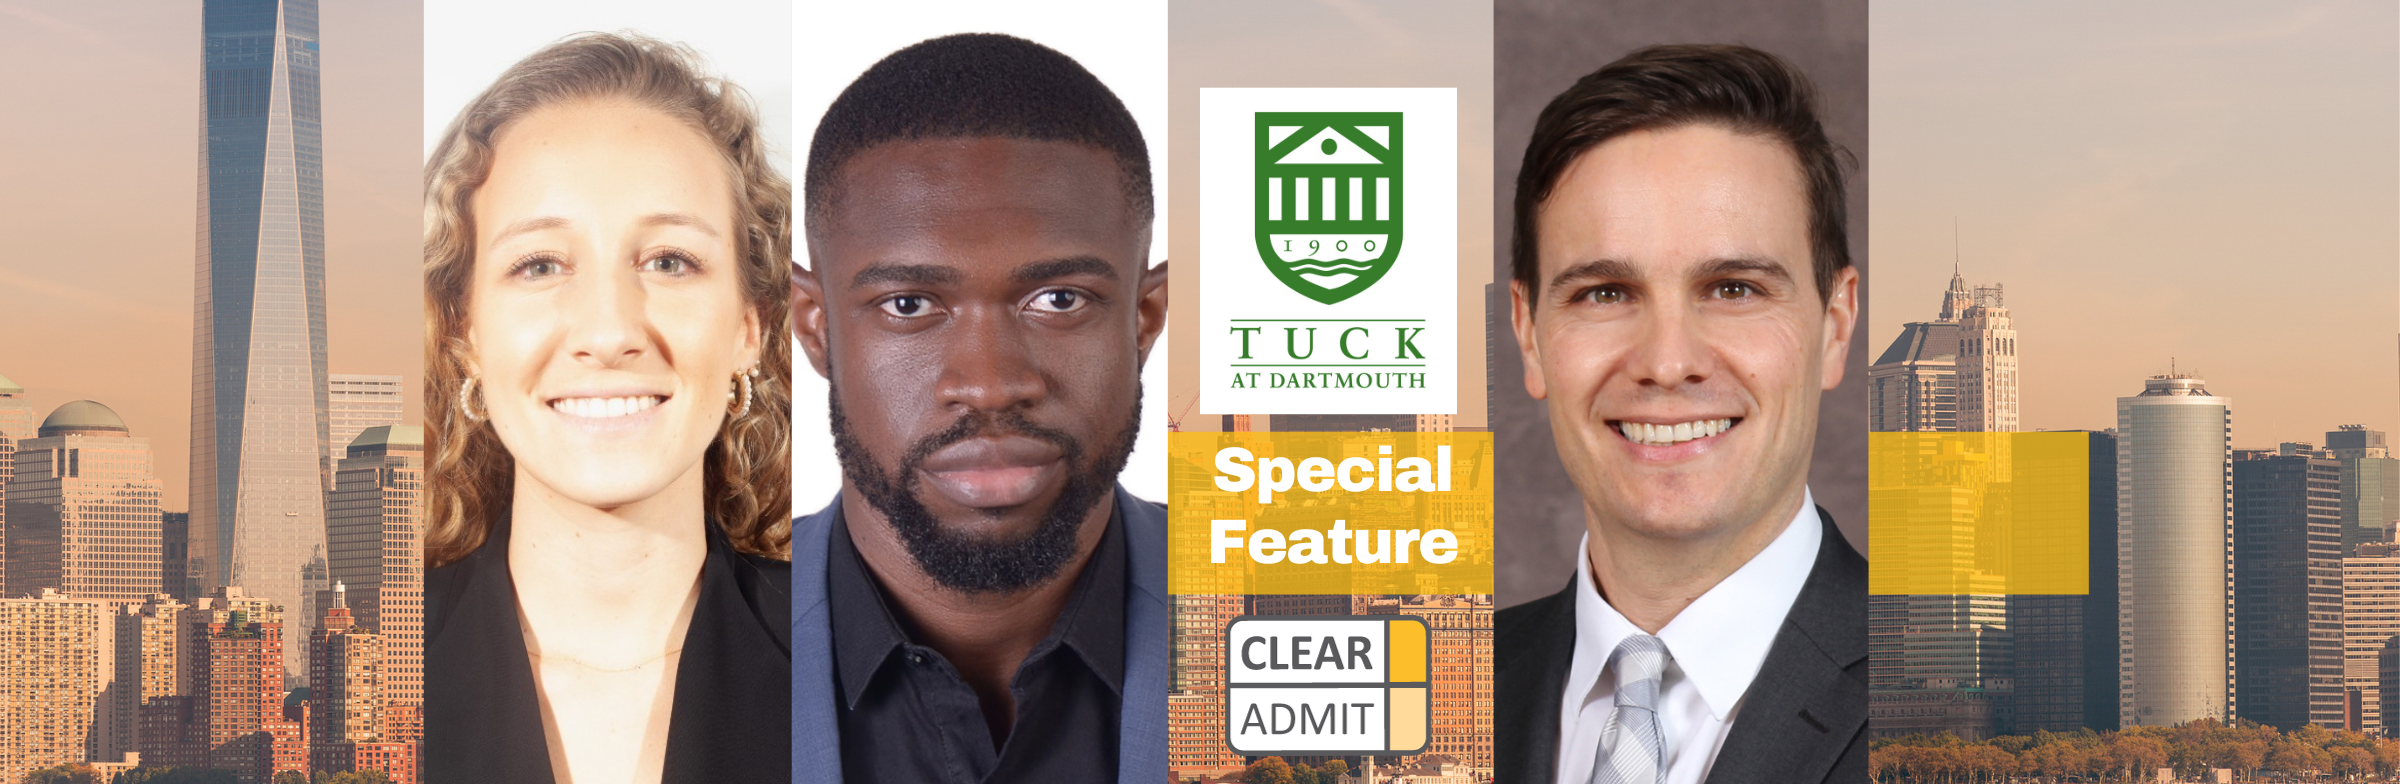 Image for From Tuck to Wall Street: Meet 3 Recent Tuck MBAs in New York’s Finance Scene